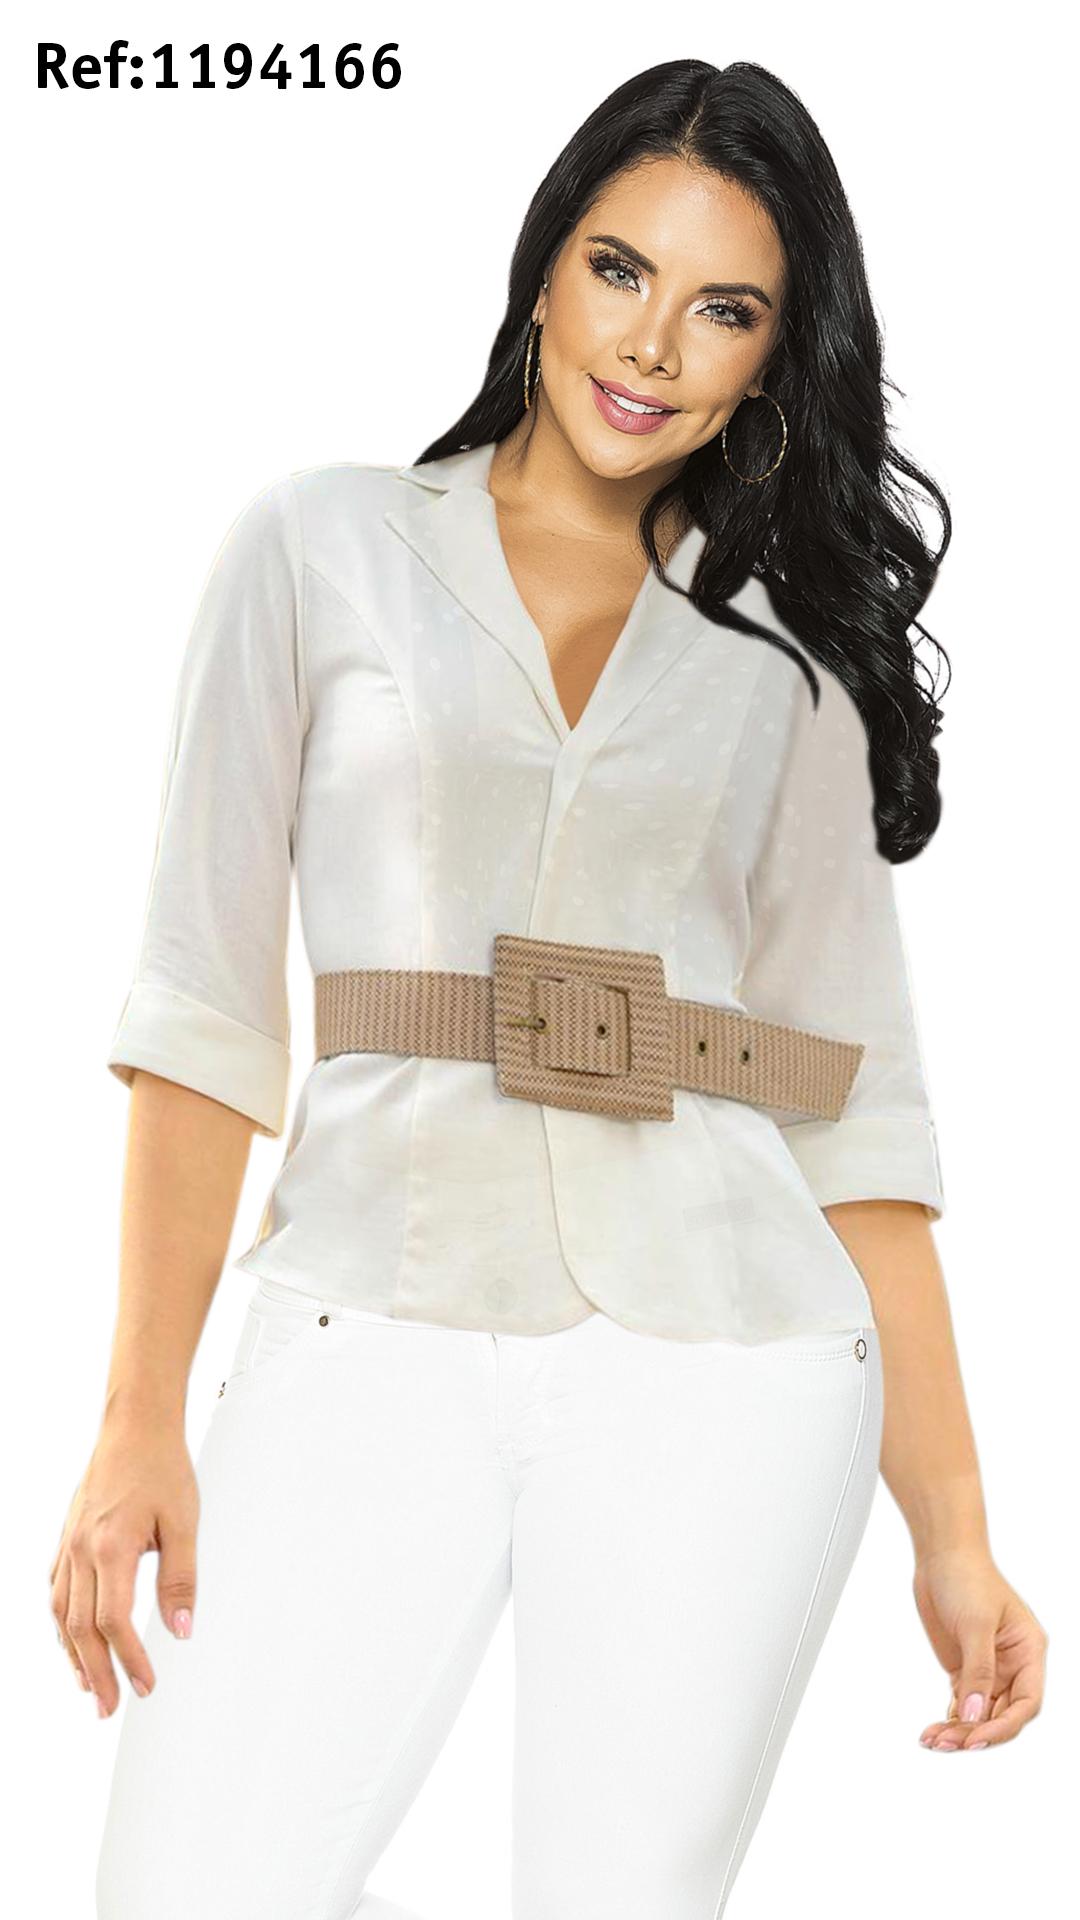 Colombian blouse with sleeves to the forearm and decorated belt